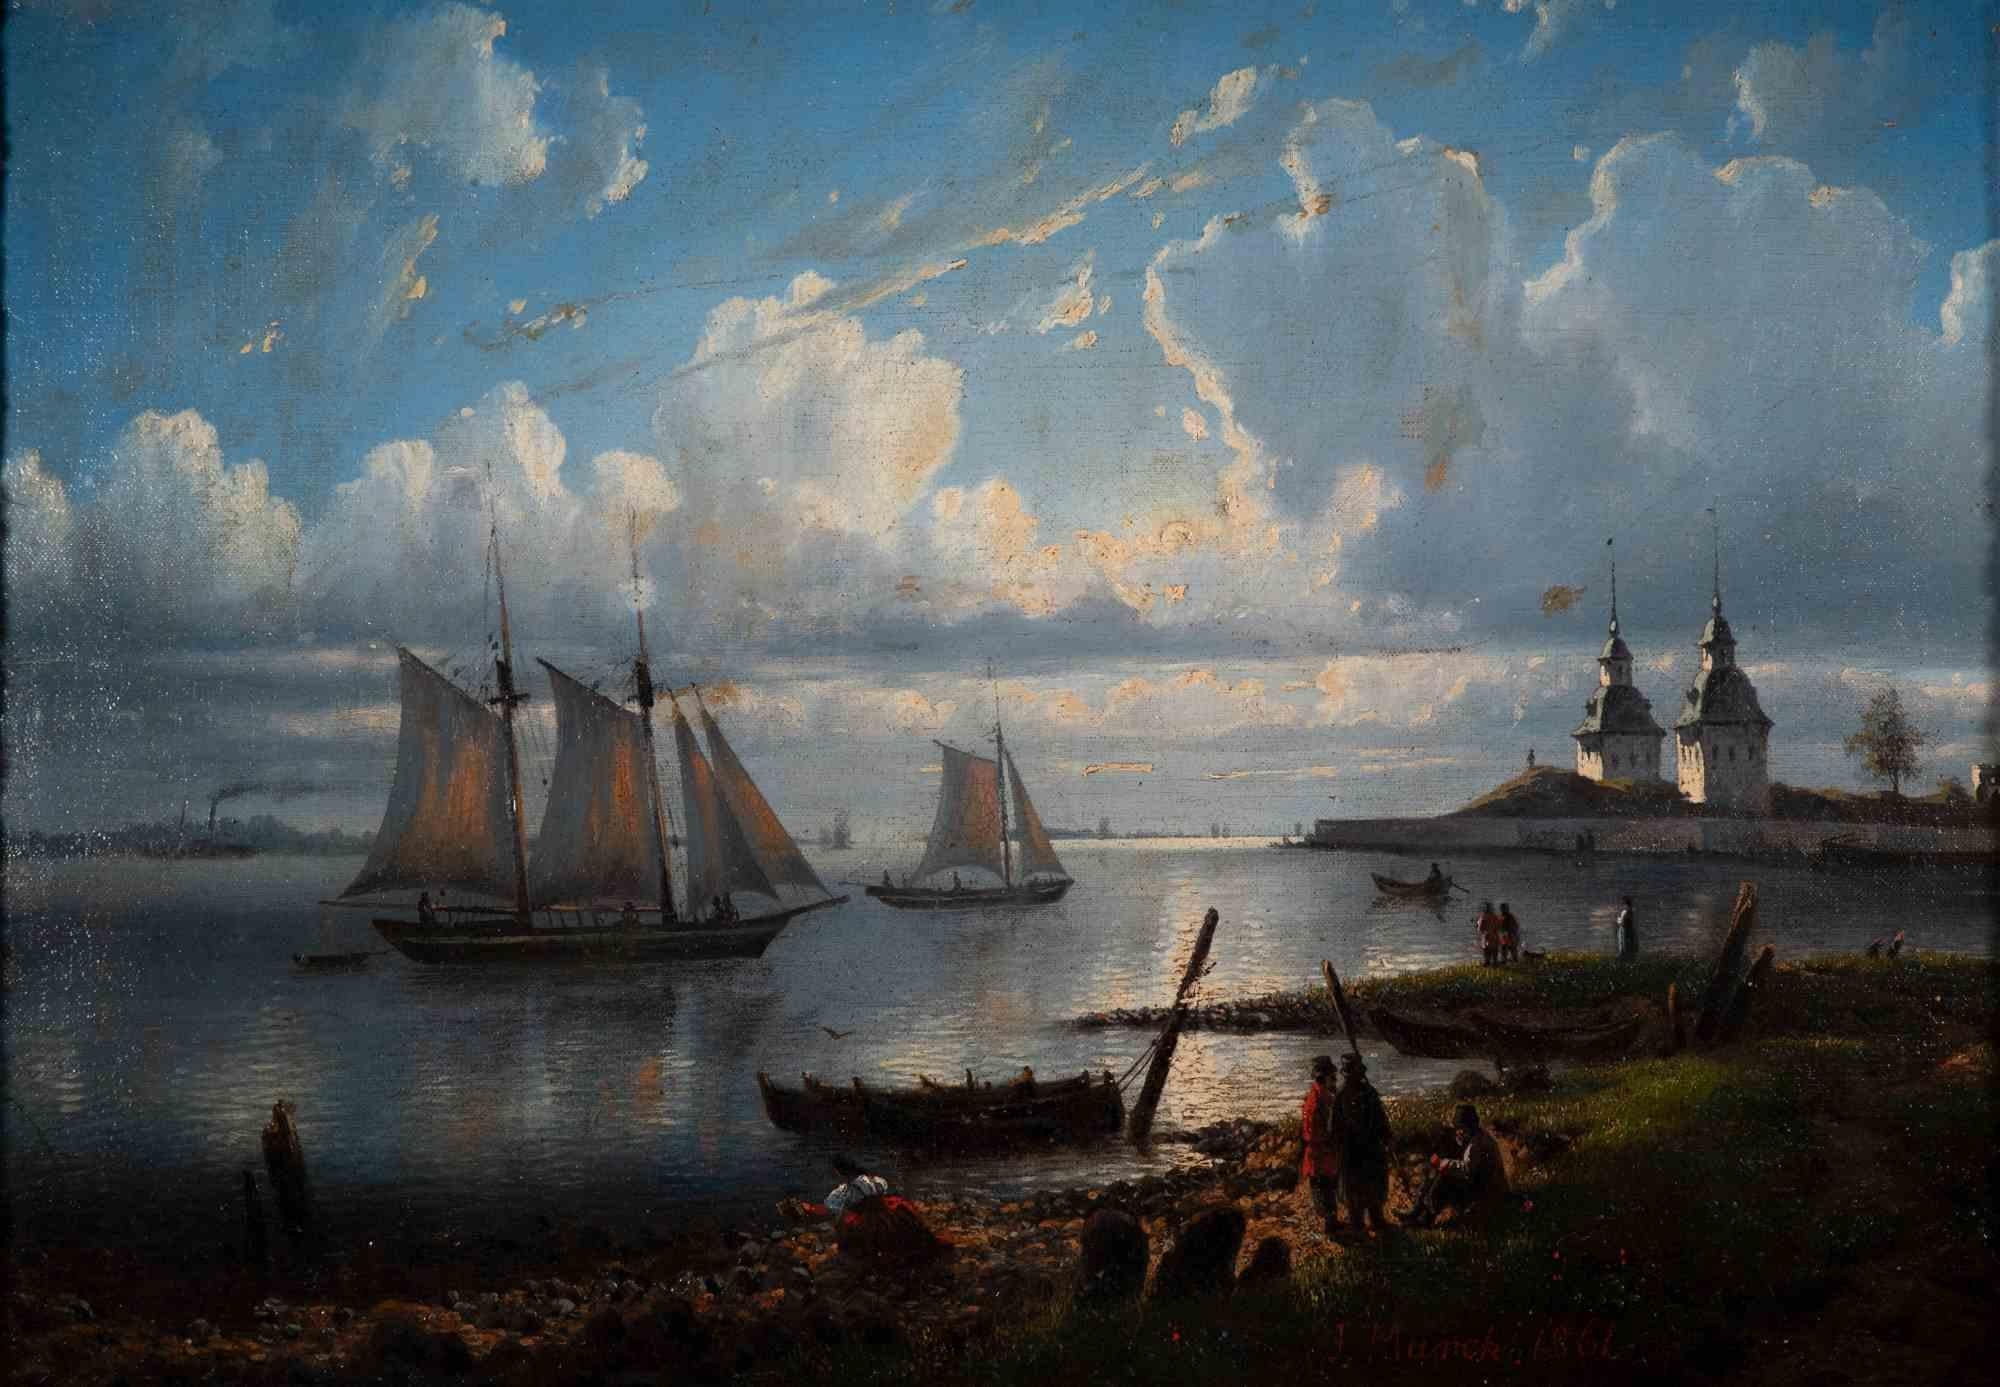 Unknown Figurative Painting - Sunrise Landscape with Boats - Oil Painting Russian School  - 1861